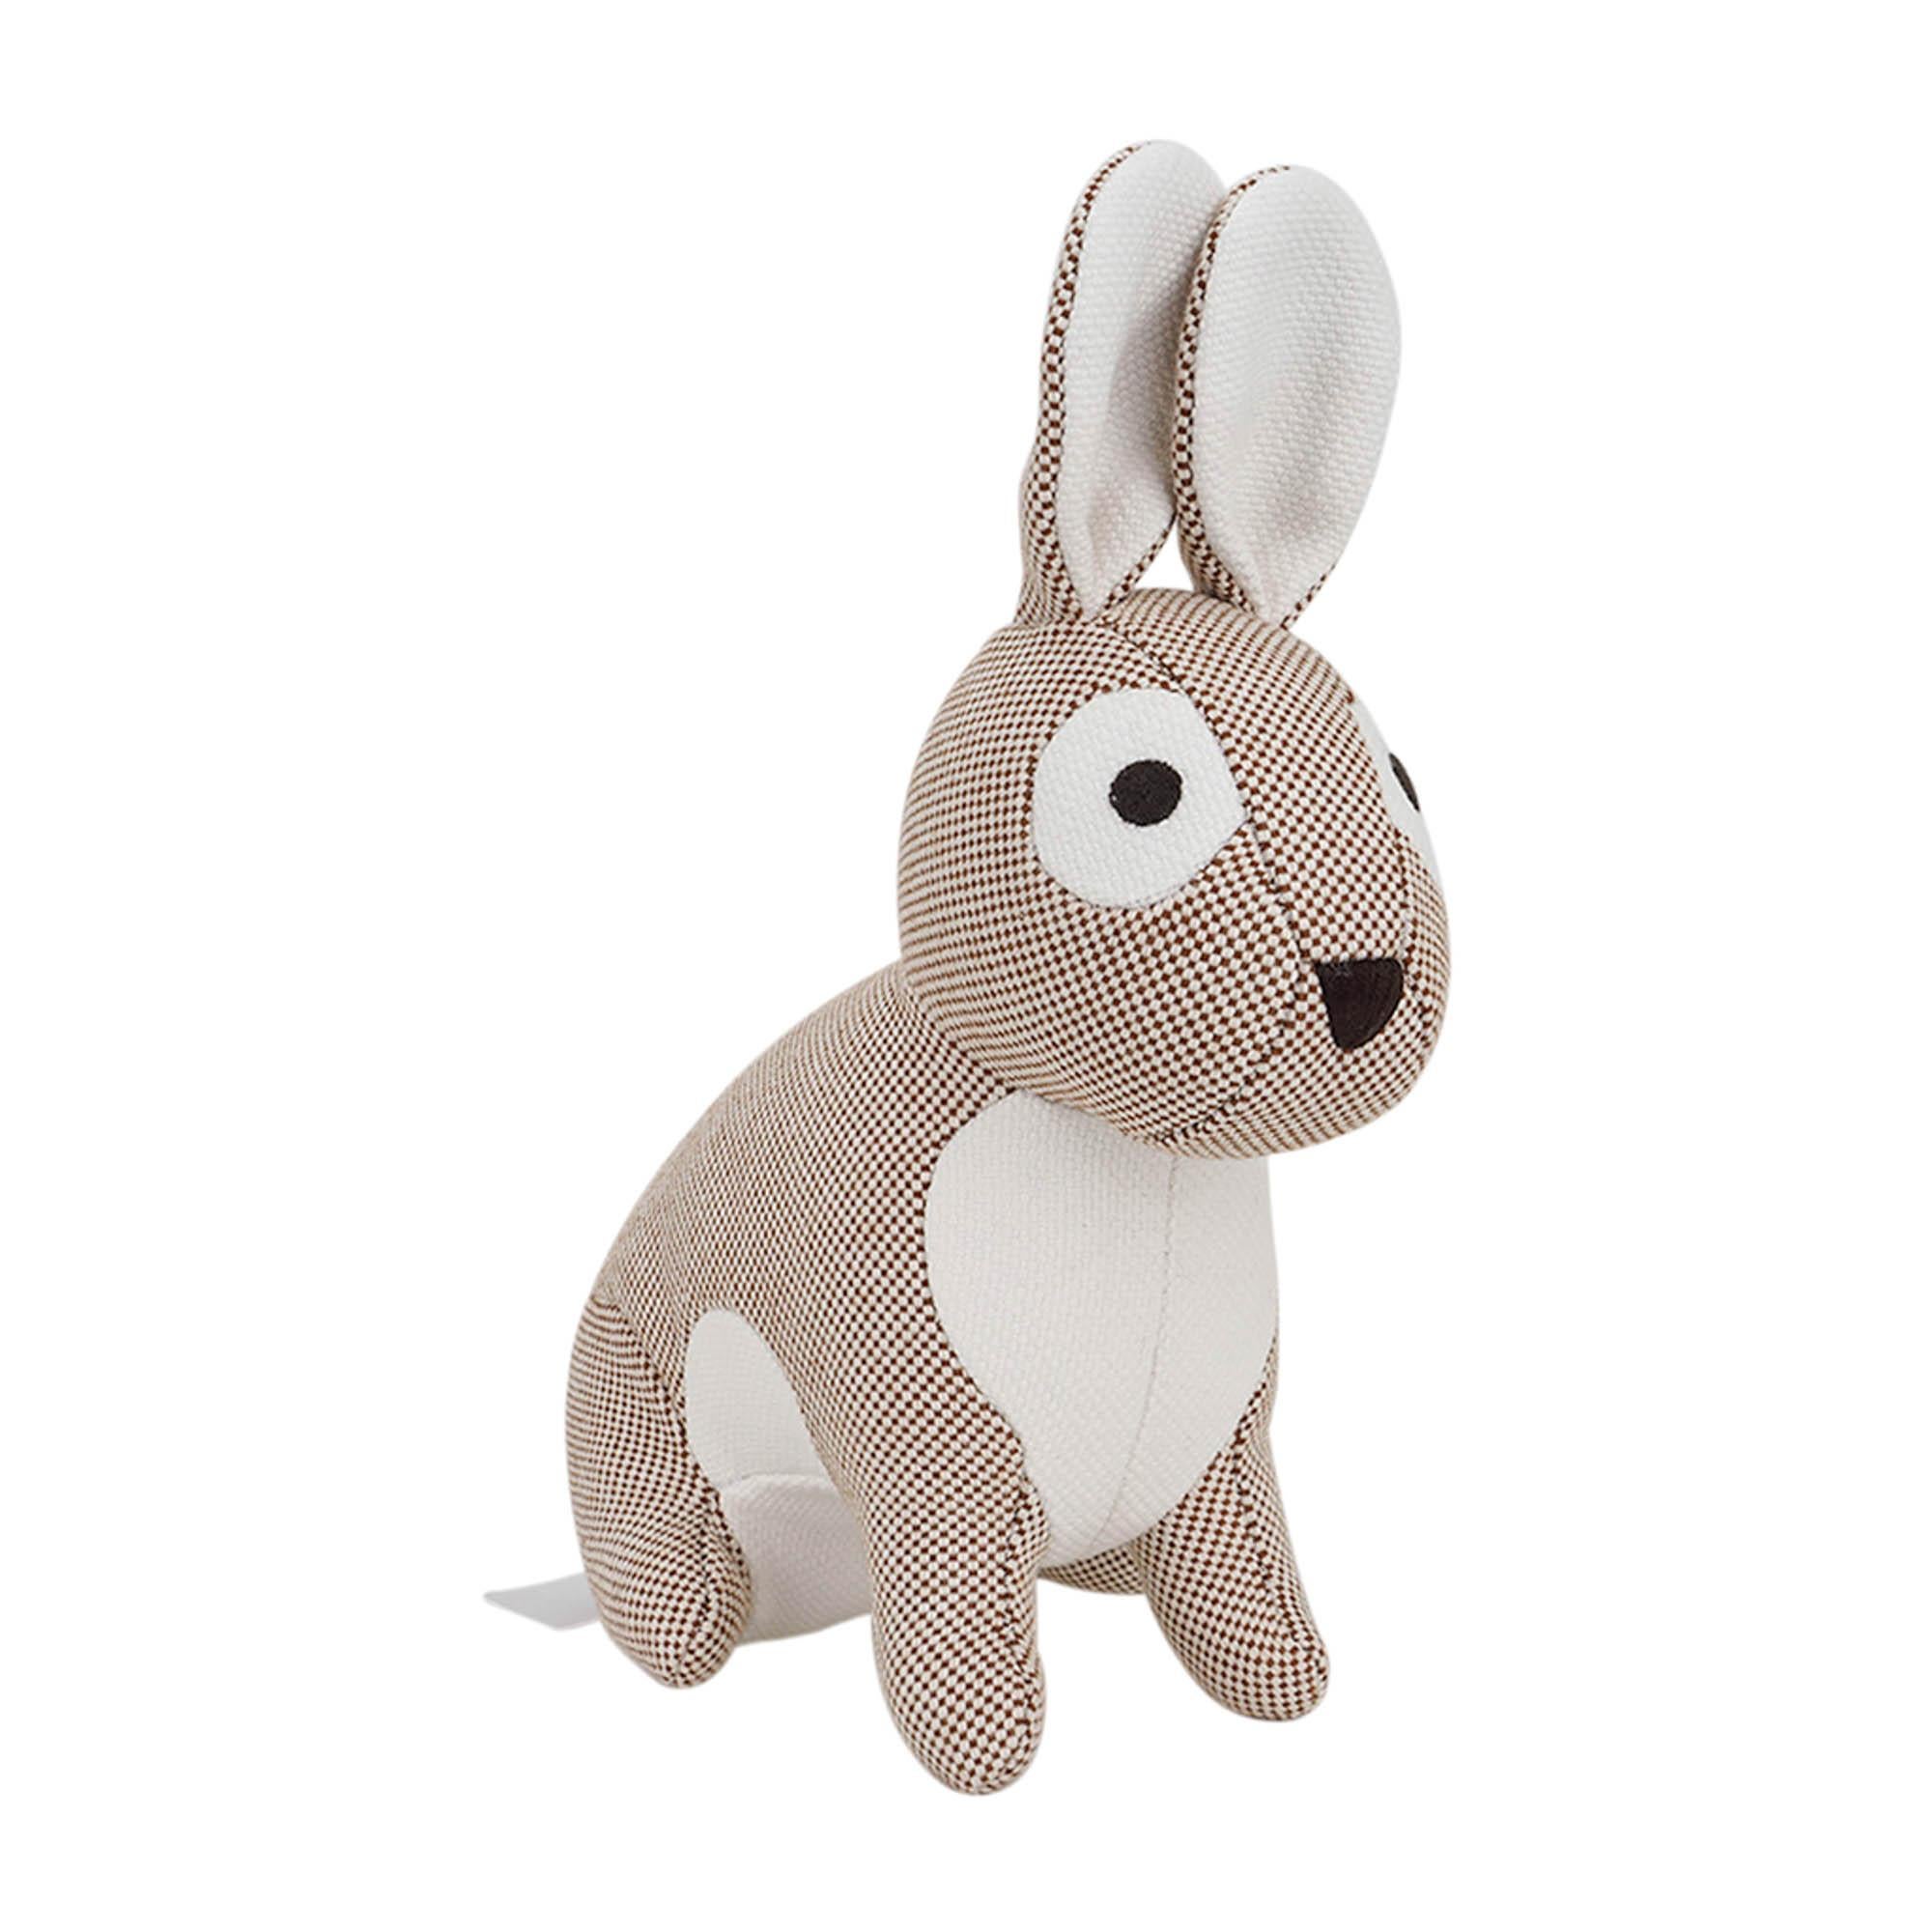 Mightychic offers an Hermes Celestin Rabbit Plush Toy featured in Naturel.
H canvas cotton.
Delightful!
Designed by Jan Bajtlik.
A charming gift idea.
Fabric is 100% cotton with polyester filling.
New or Store Fresh Condition.
final sale

DOG PLUSH